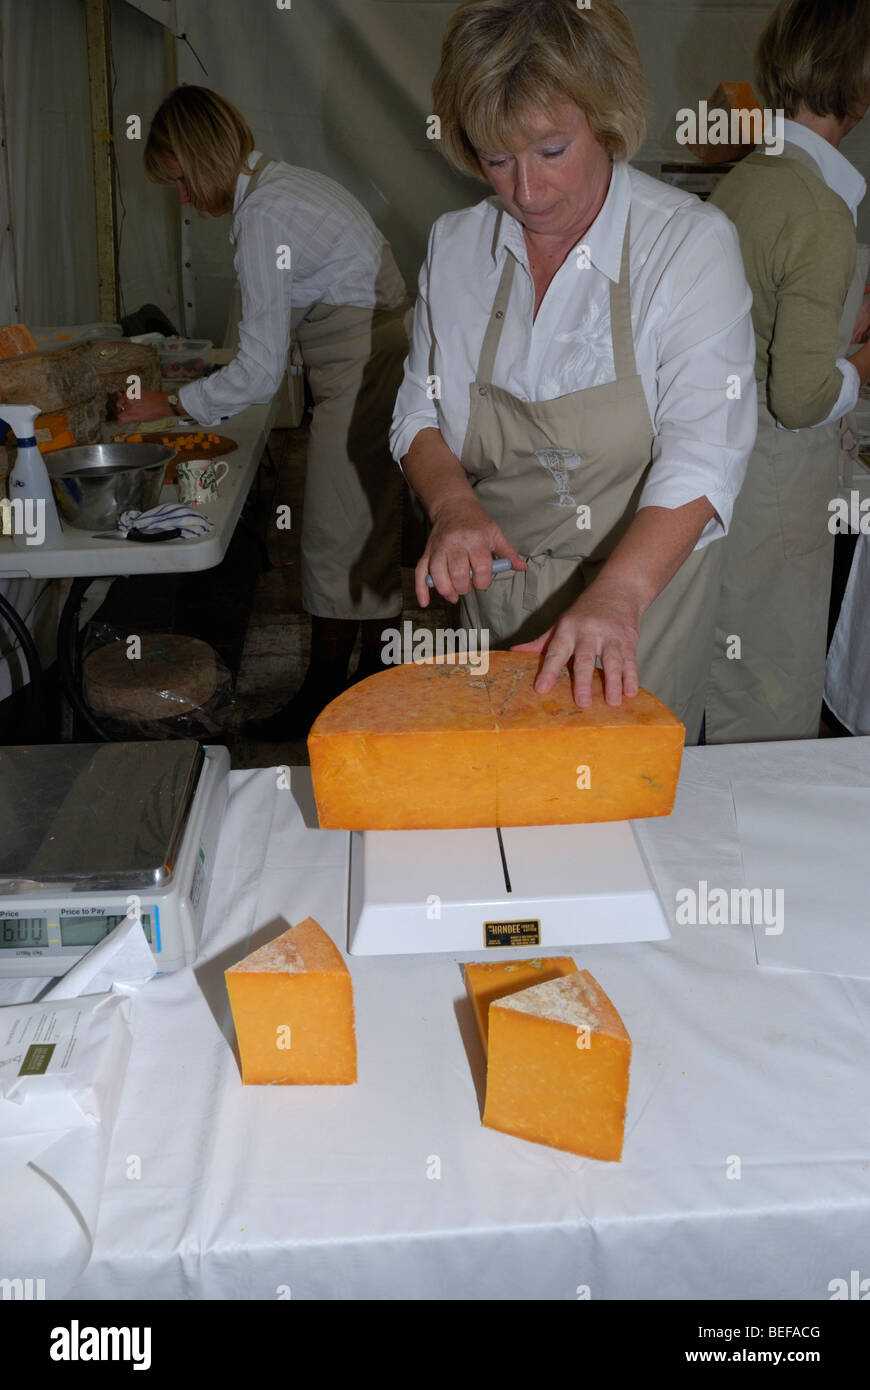 https://c8.alamy.com/comp/BEFACG/cutting-a-round-of-red-leicester-cheese-2-of-3-BEFACG.jpg